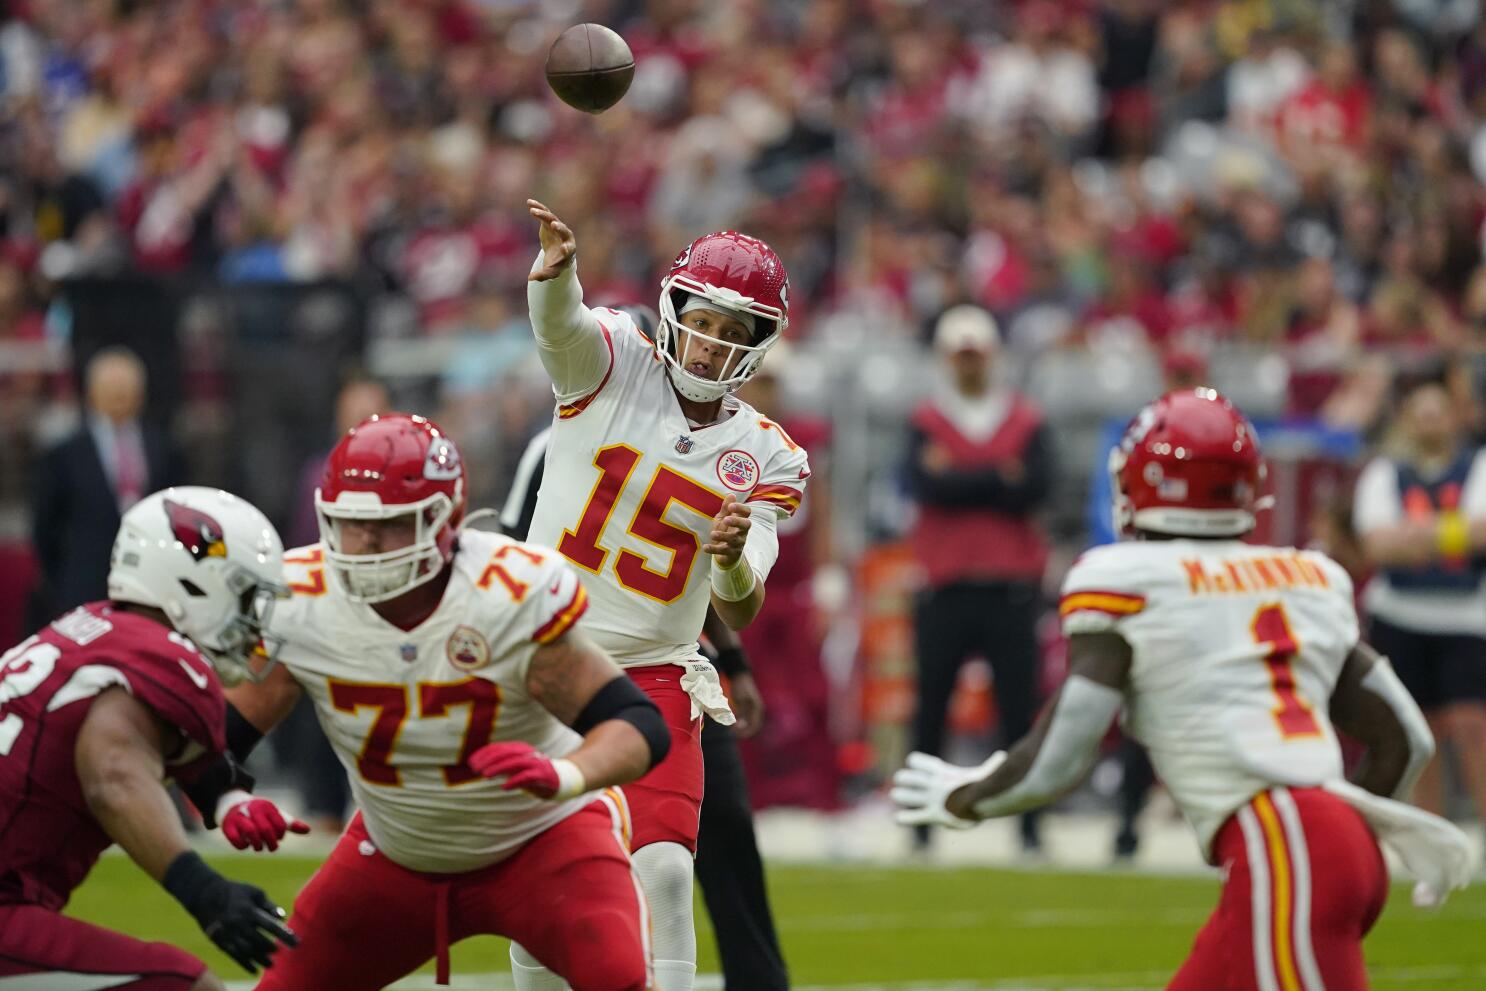 Patrick Mahomes: The promising baseball pitcher who became the face of the  NFL